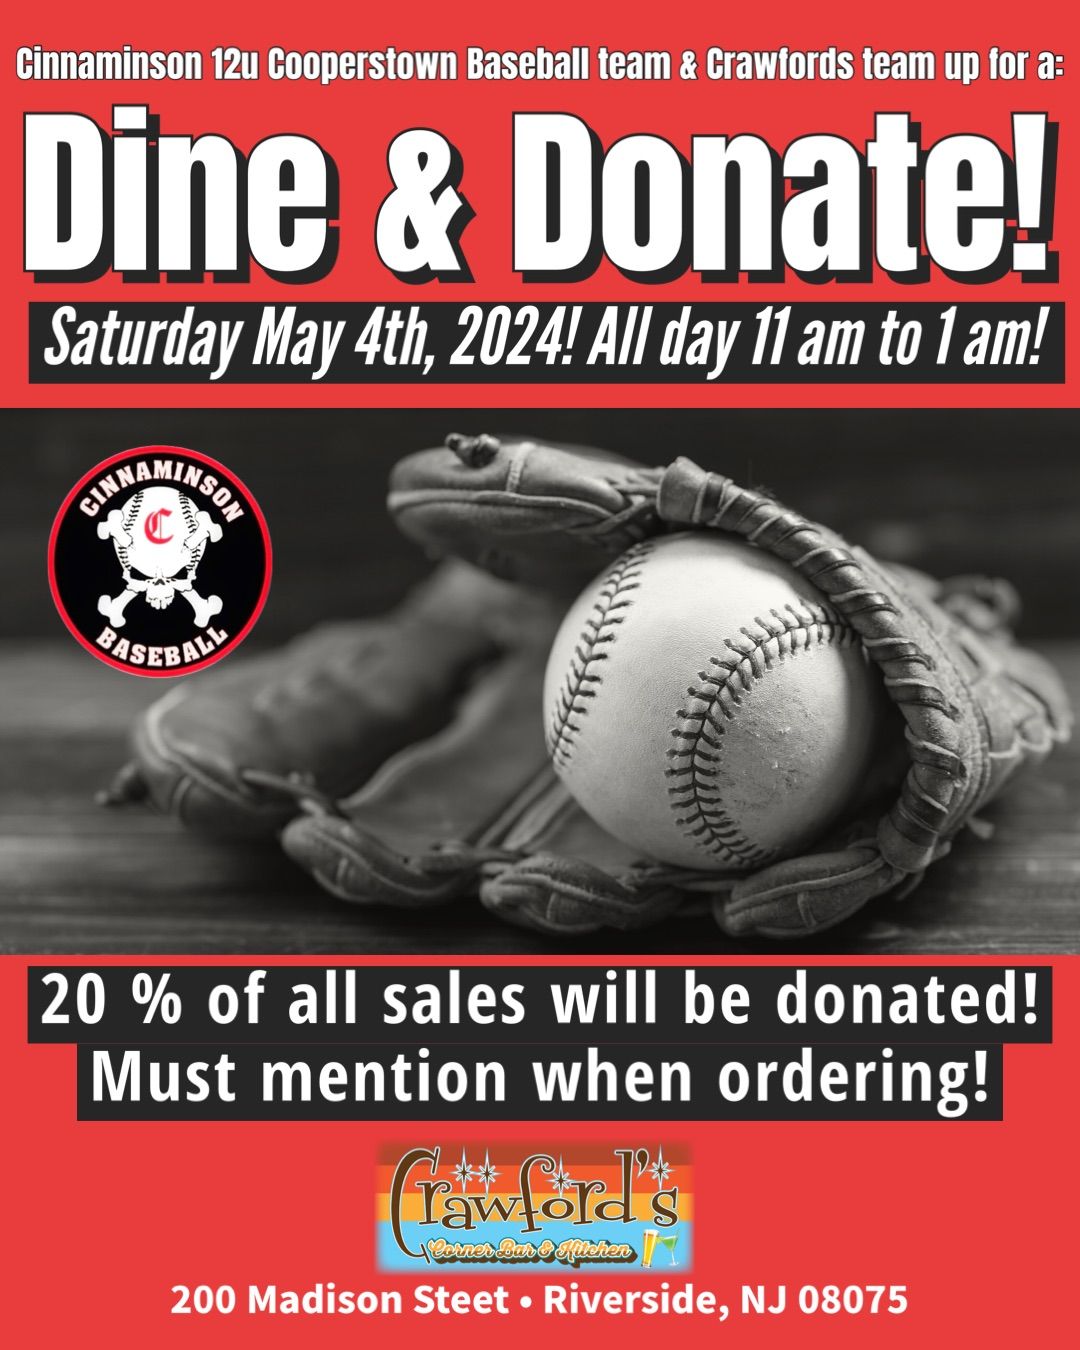 Dine & Donate for Cinnaminson 12u Cooperstown Baseball at Crawfords!